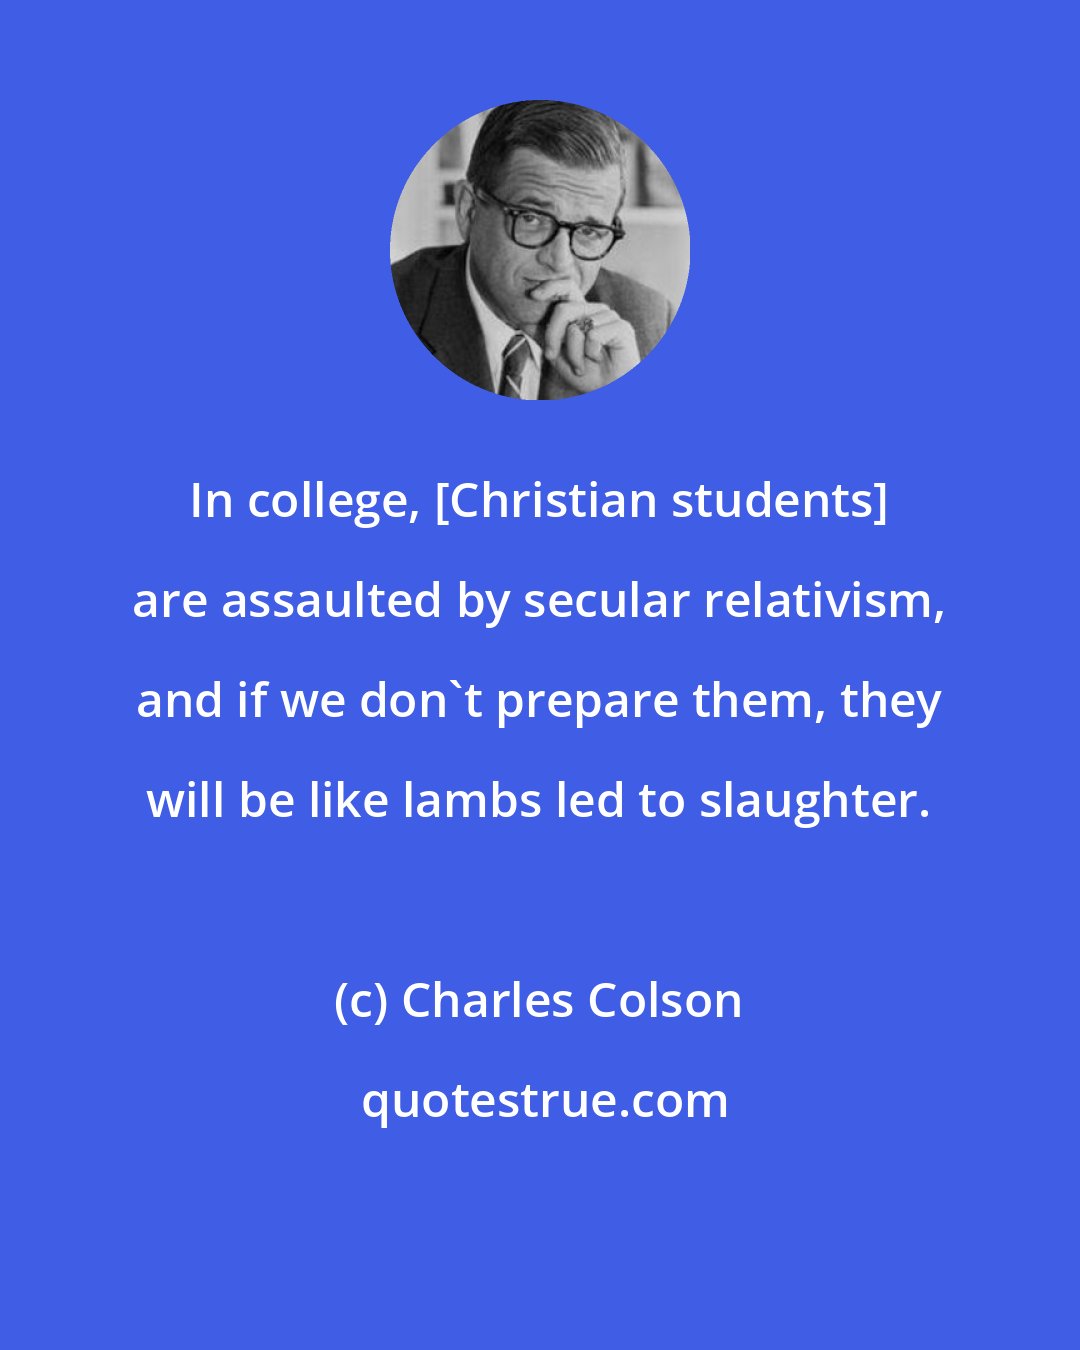 Charles Colson: In college, [Christian students] are assaulted by secular relativism, and if we don't prepare them, they will be like lambs led to slaughter.